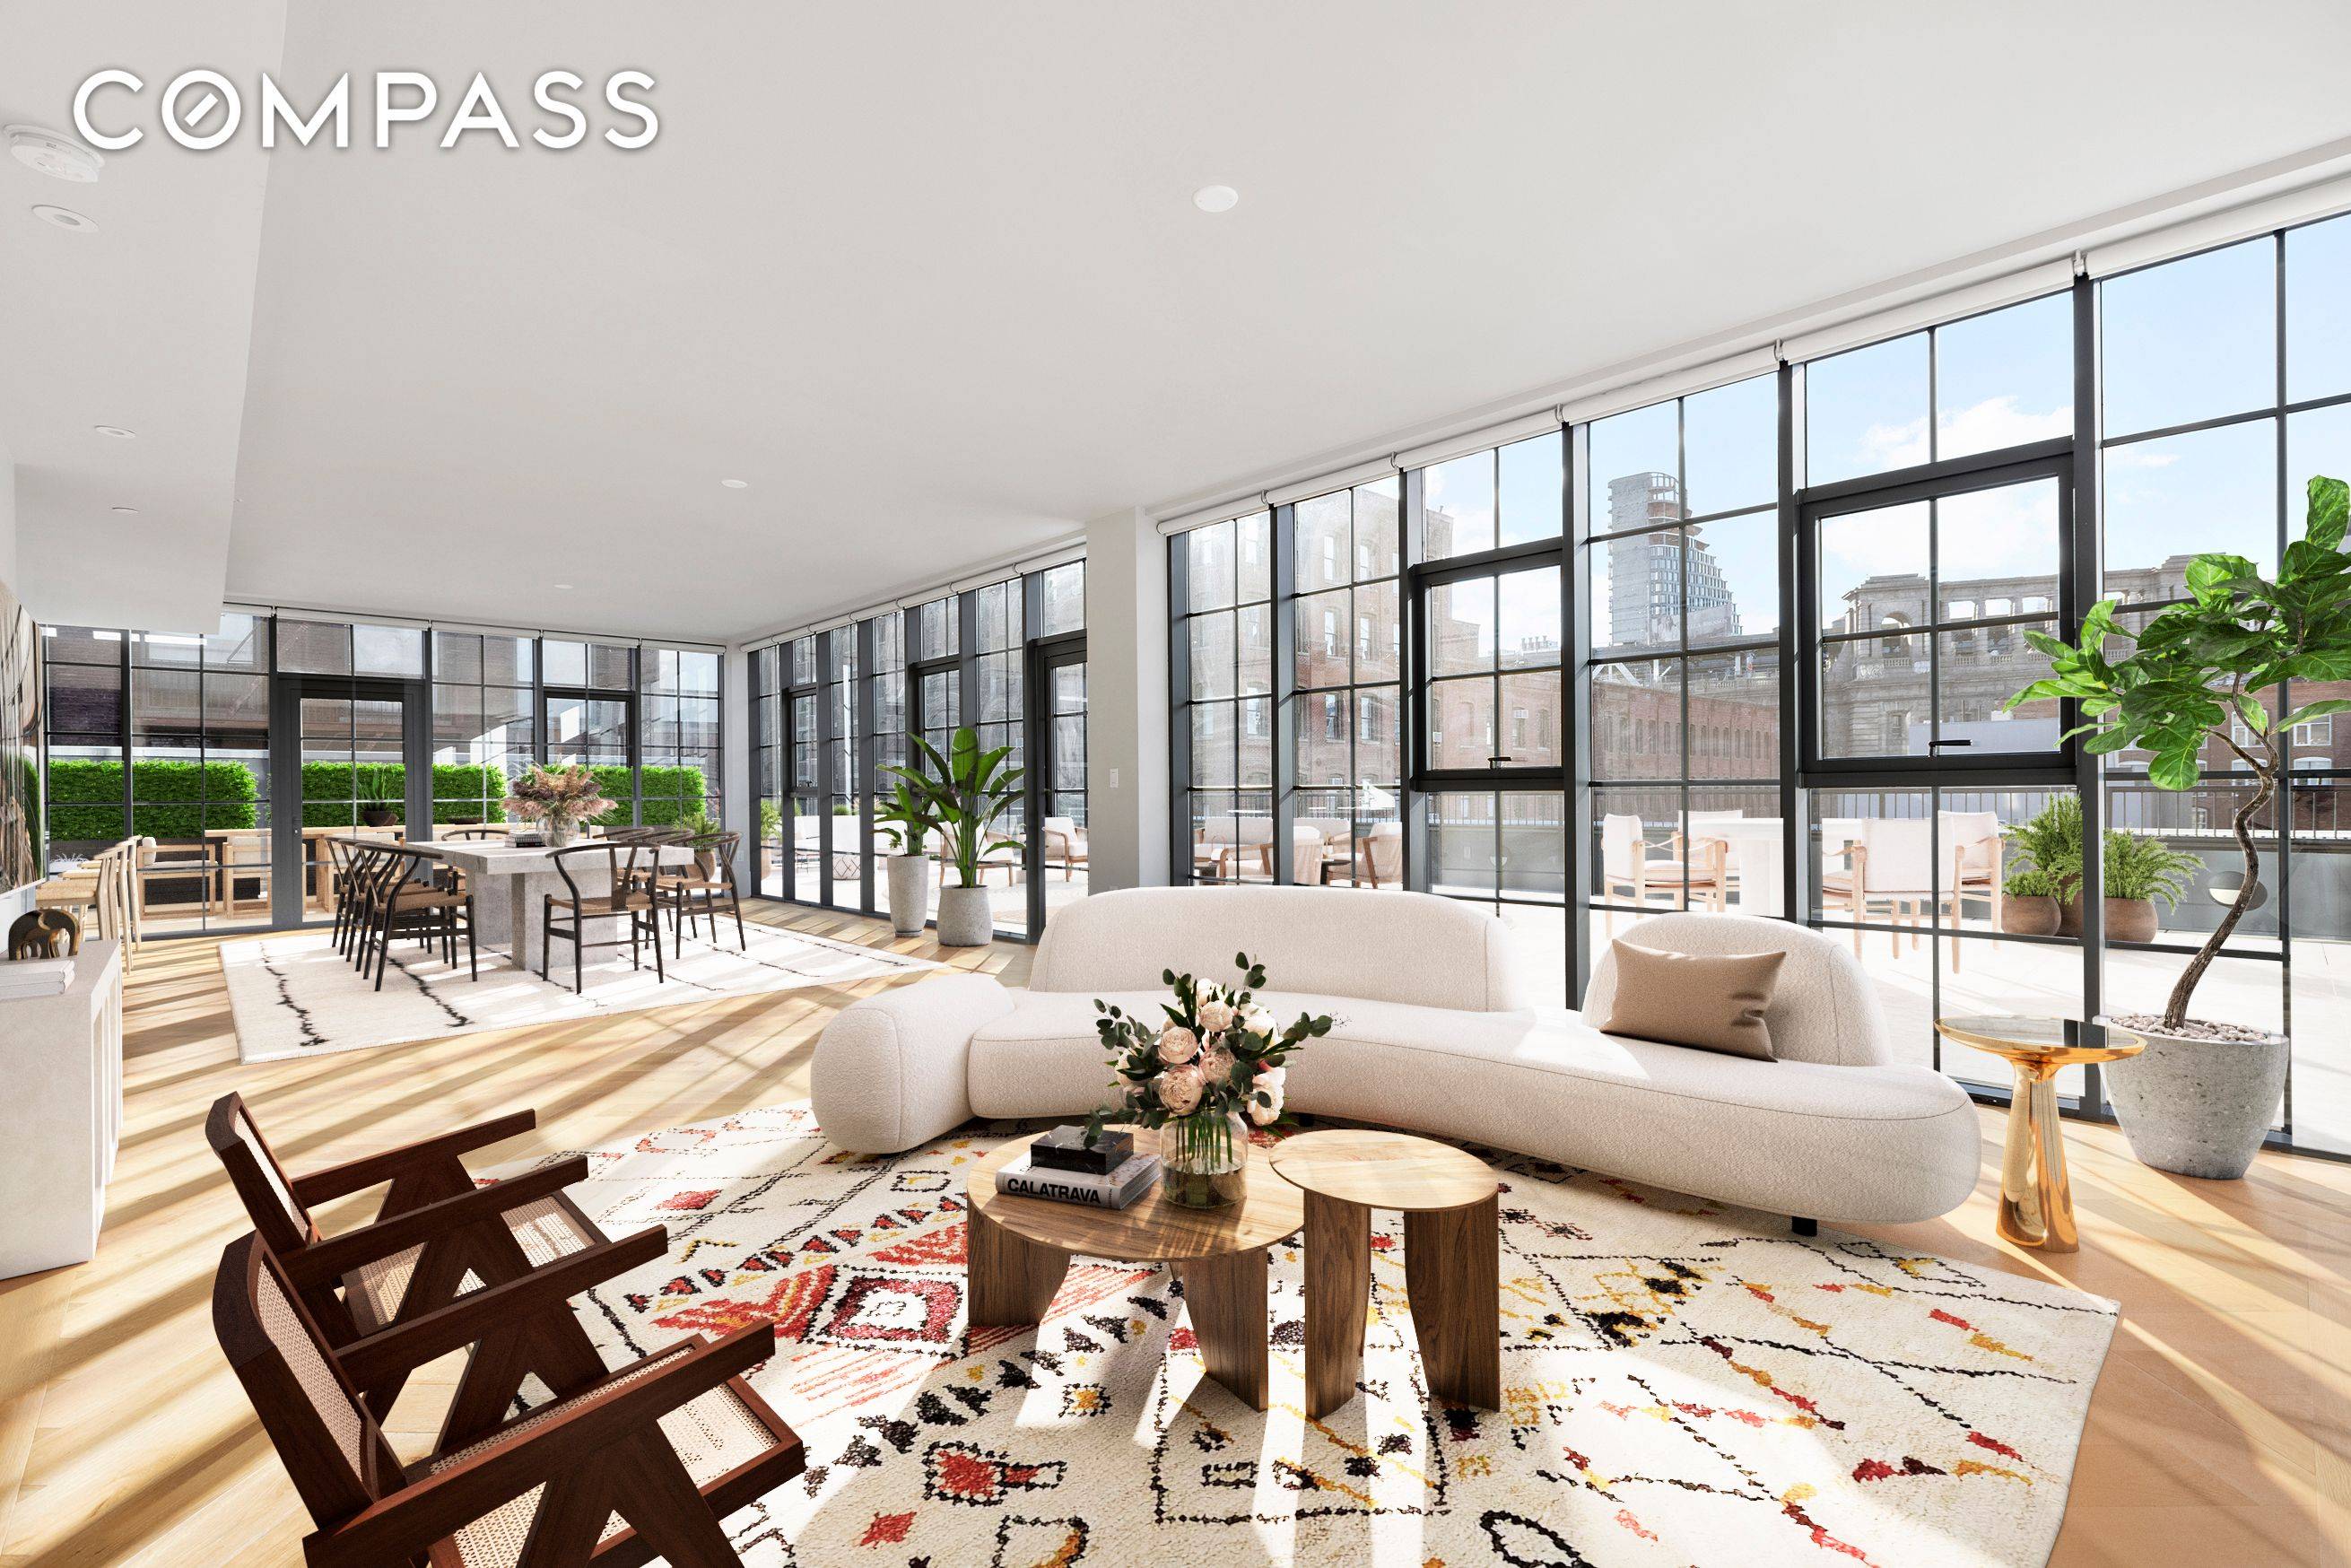 A rare find, this glamorous penthouse duplex sits atop a converted warehouse in the historic waterfront neighborhood of Dumbo.